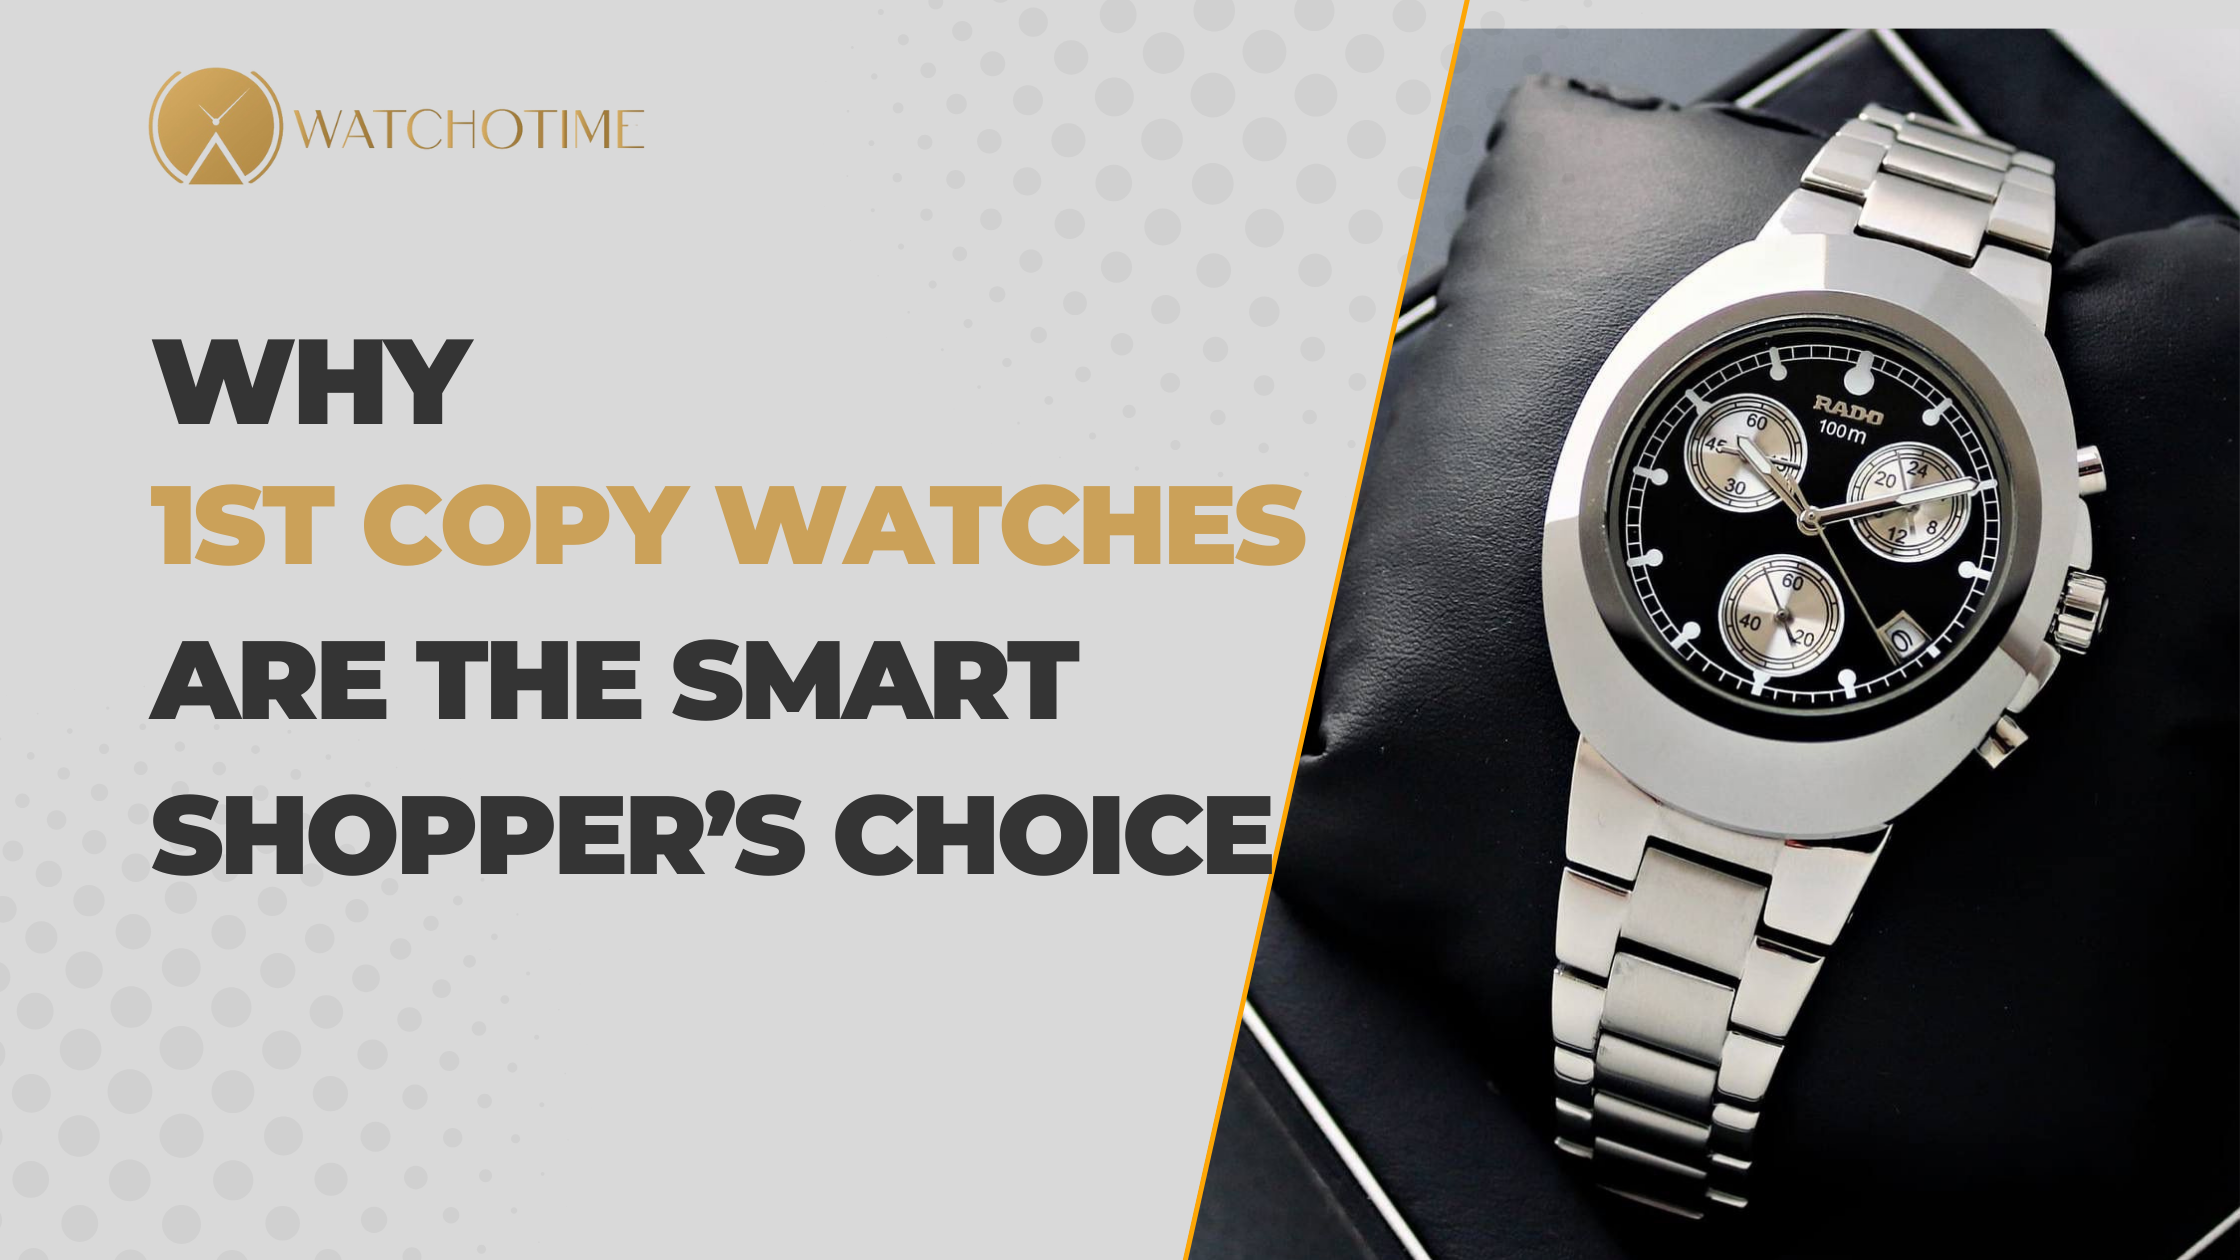 1st Copy Watches Are the Smart Shopper’s Choice